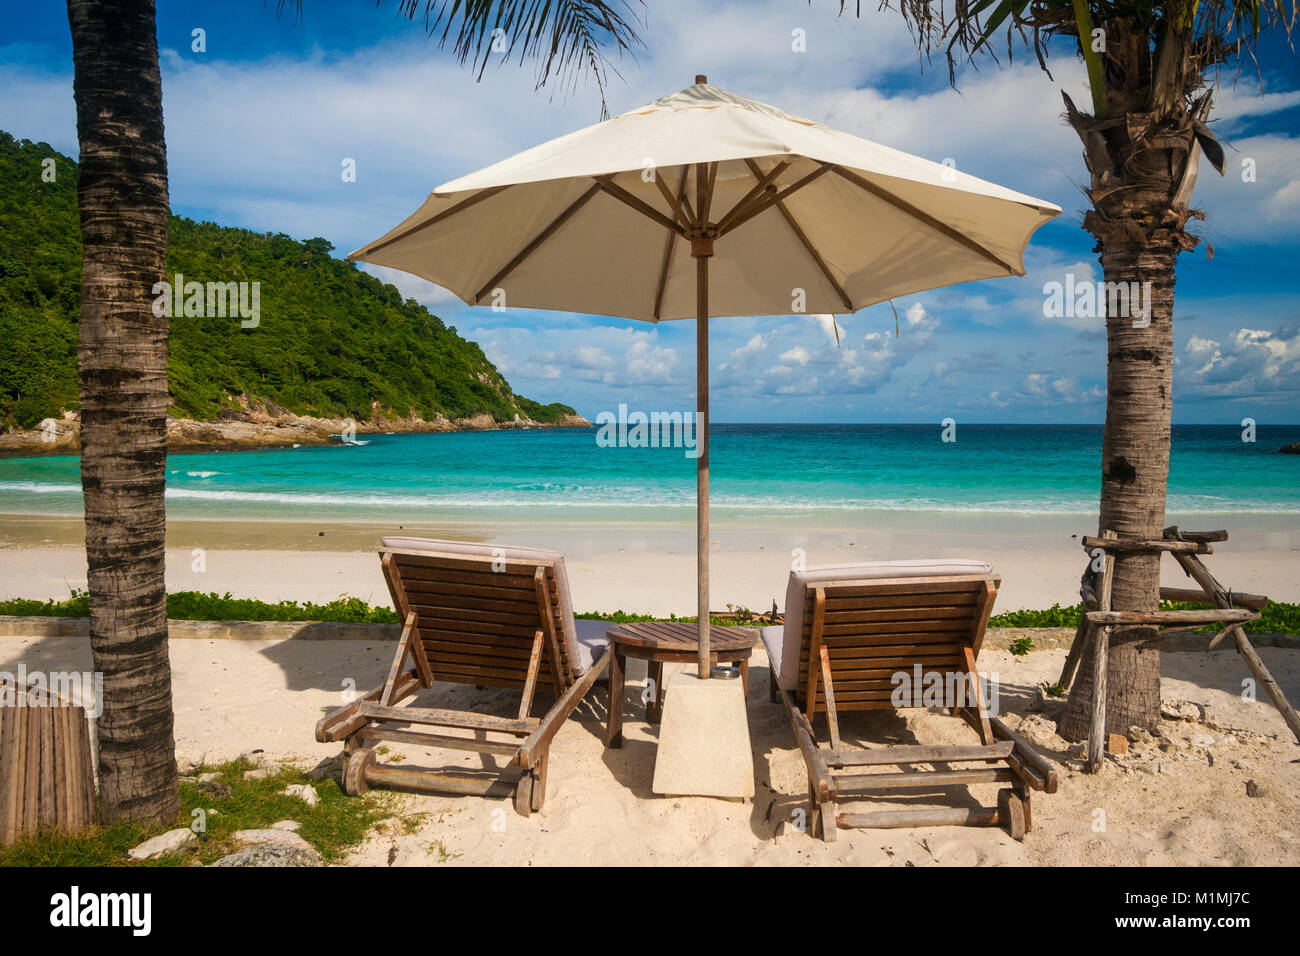 A famous tropical holiday scene with two beach chairs and an umbrella in between, flanked by palm trees. Stock Photo